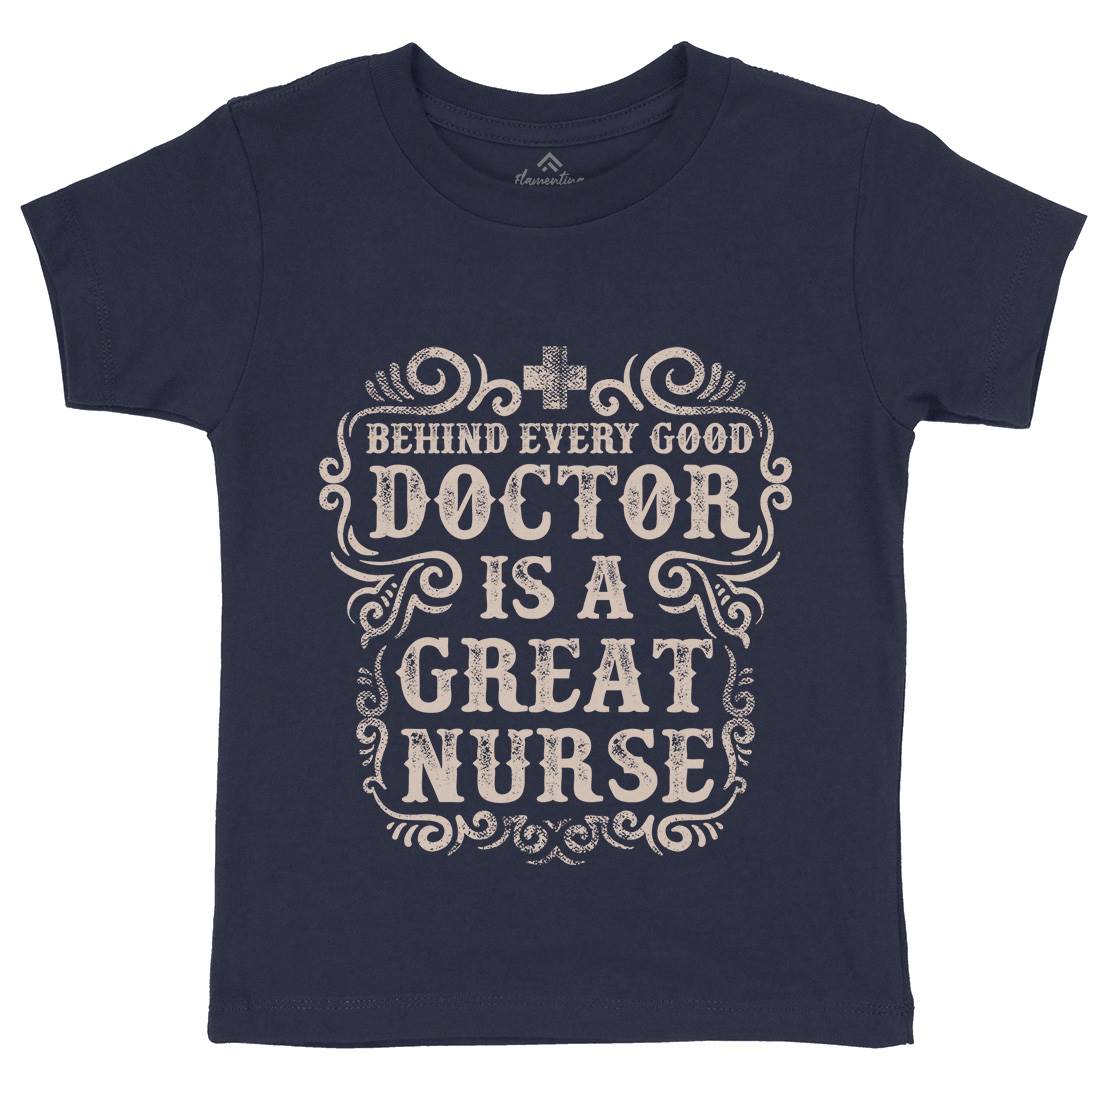 Behind Every Good Doctor Is A Great Nurse Kids Organic Crew Neck T-Shirt Work C910